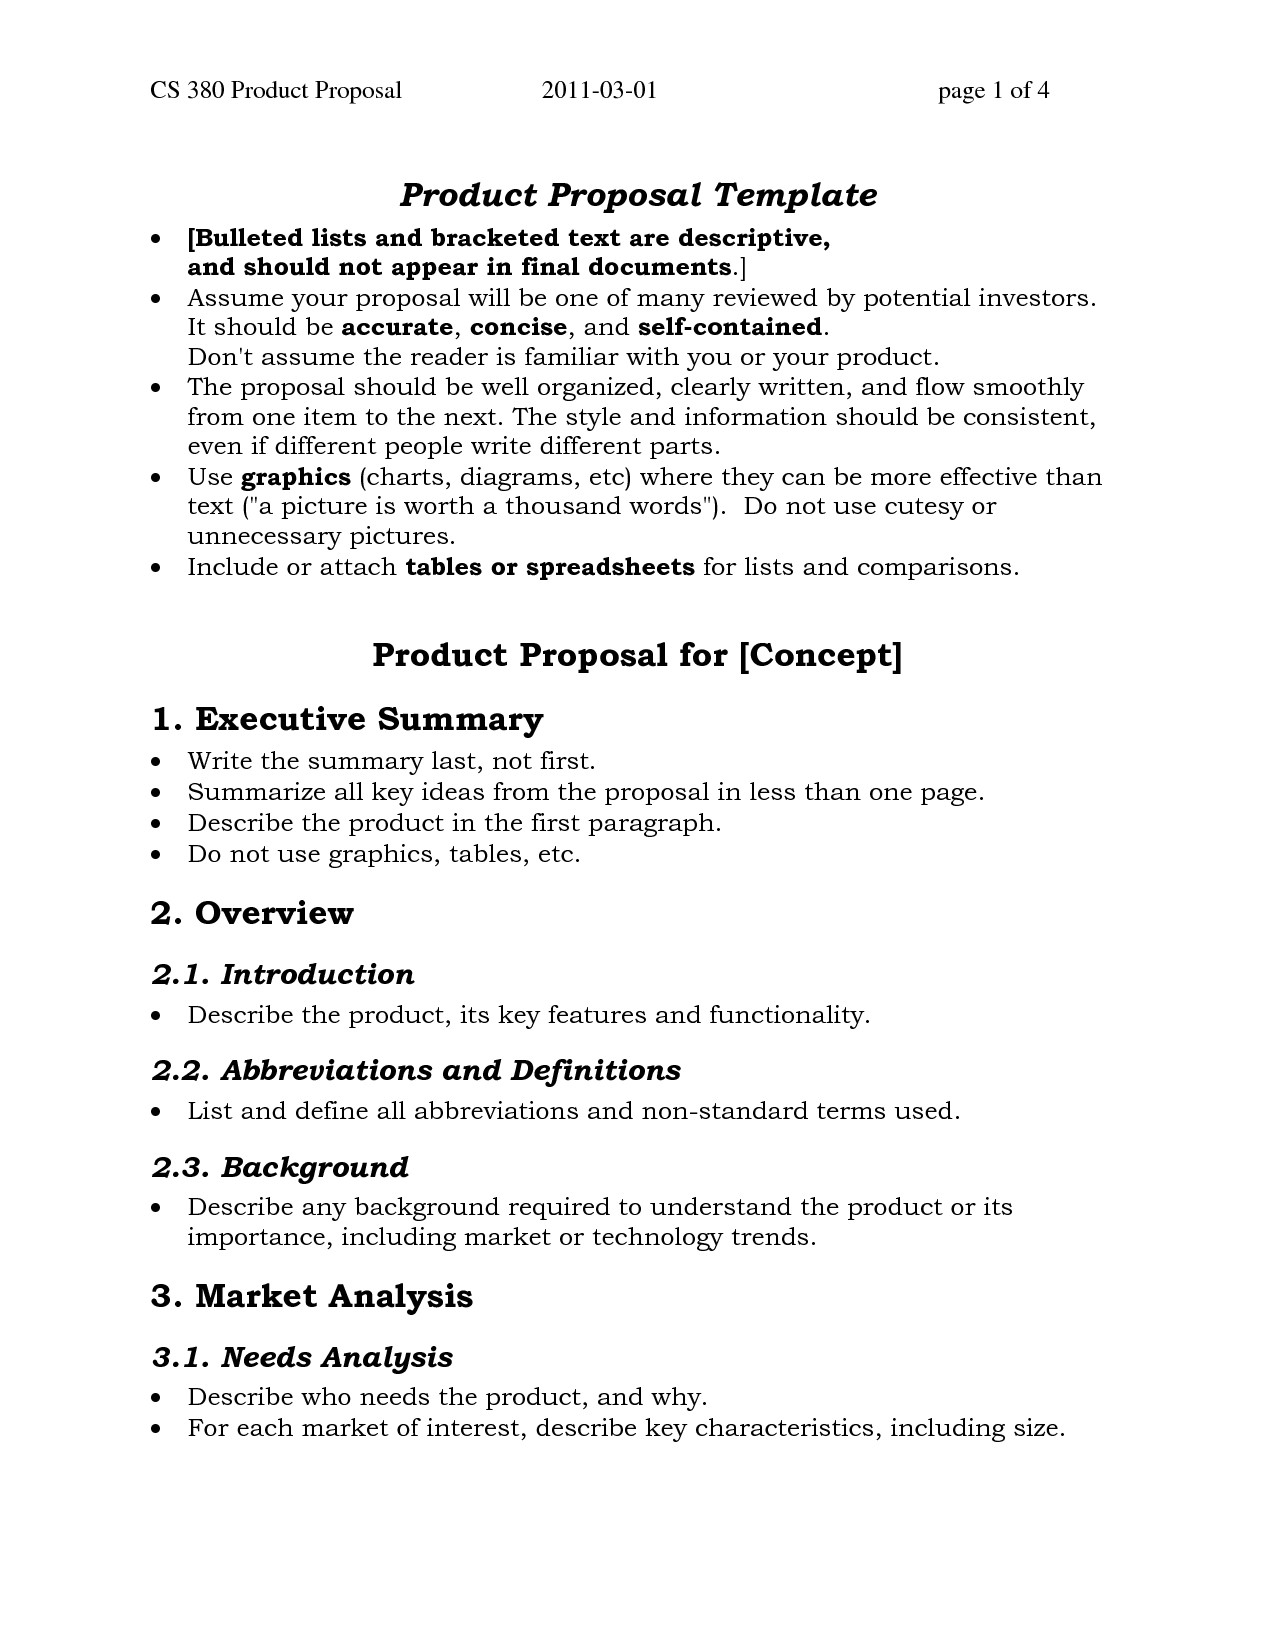 Research proposal 1 page Buying essay The University